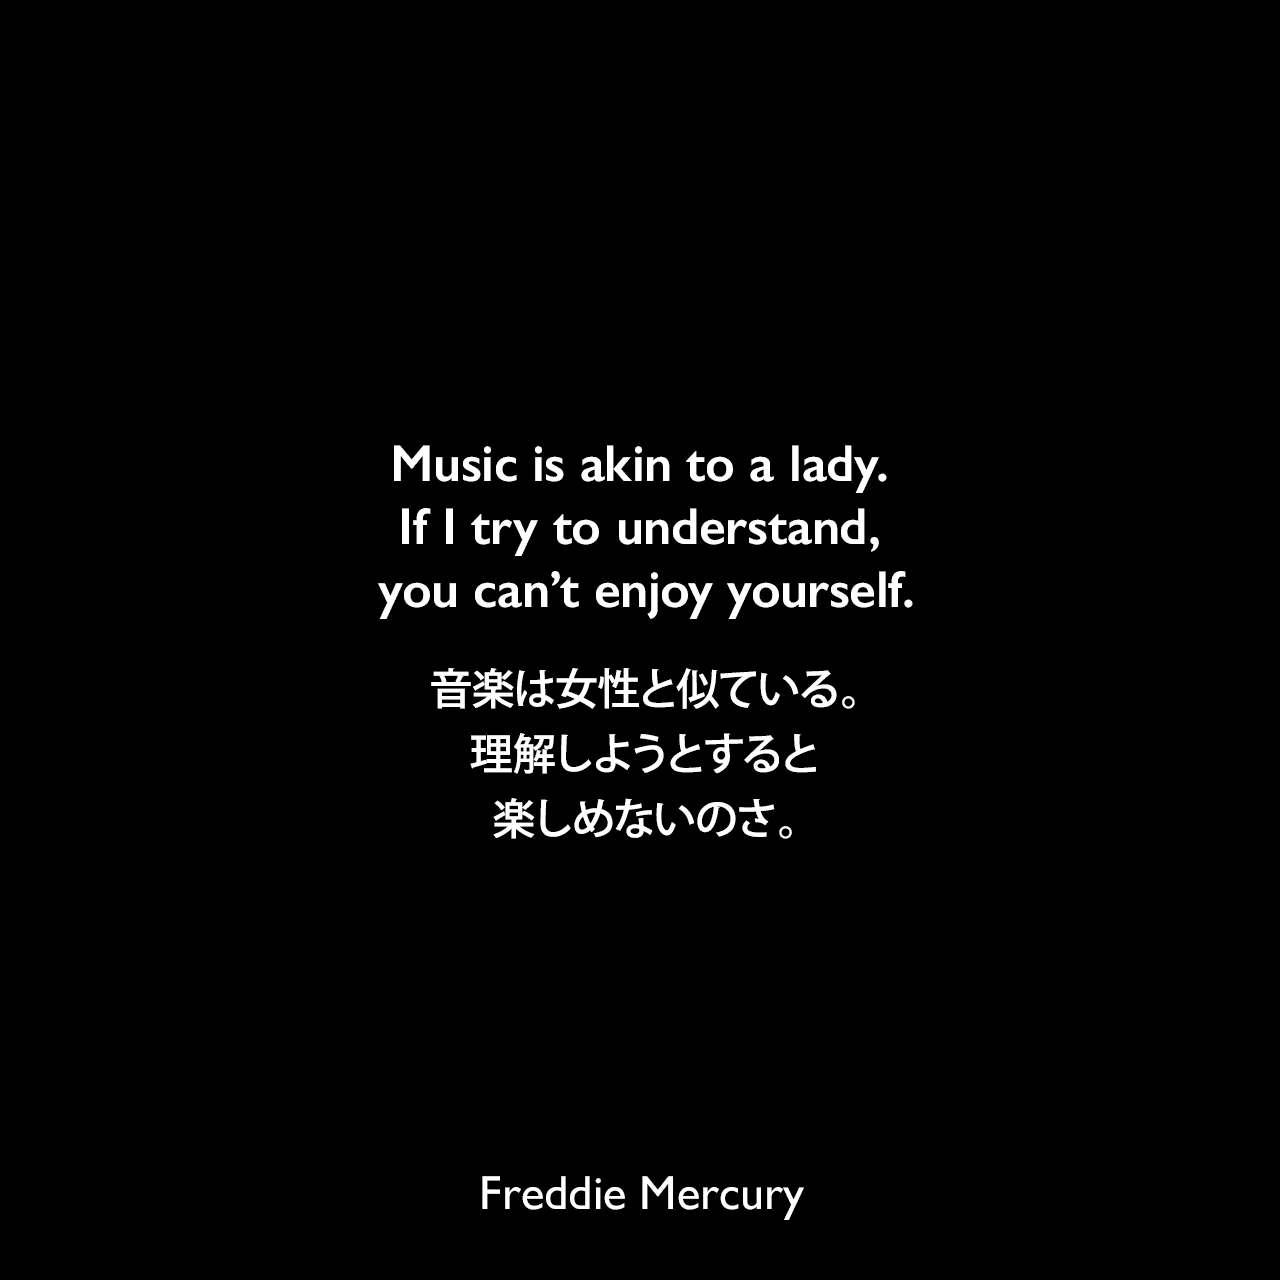 Music is akin to a lady. If I try to understand, you can’t enjoy yourself.音楽は女性と似ている。理解しようとすると楽しめないのさ。Freddie Mercury